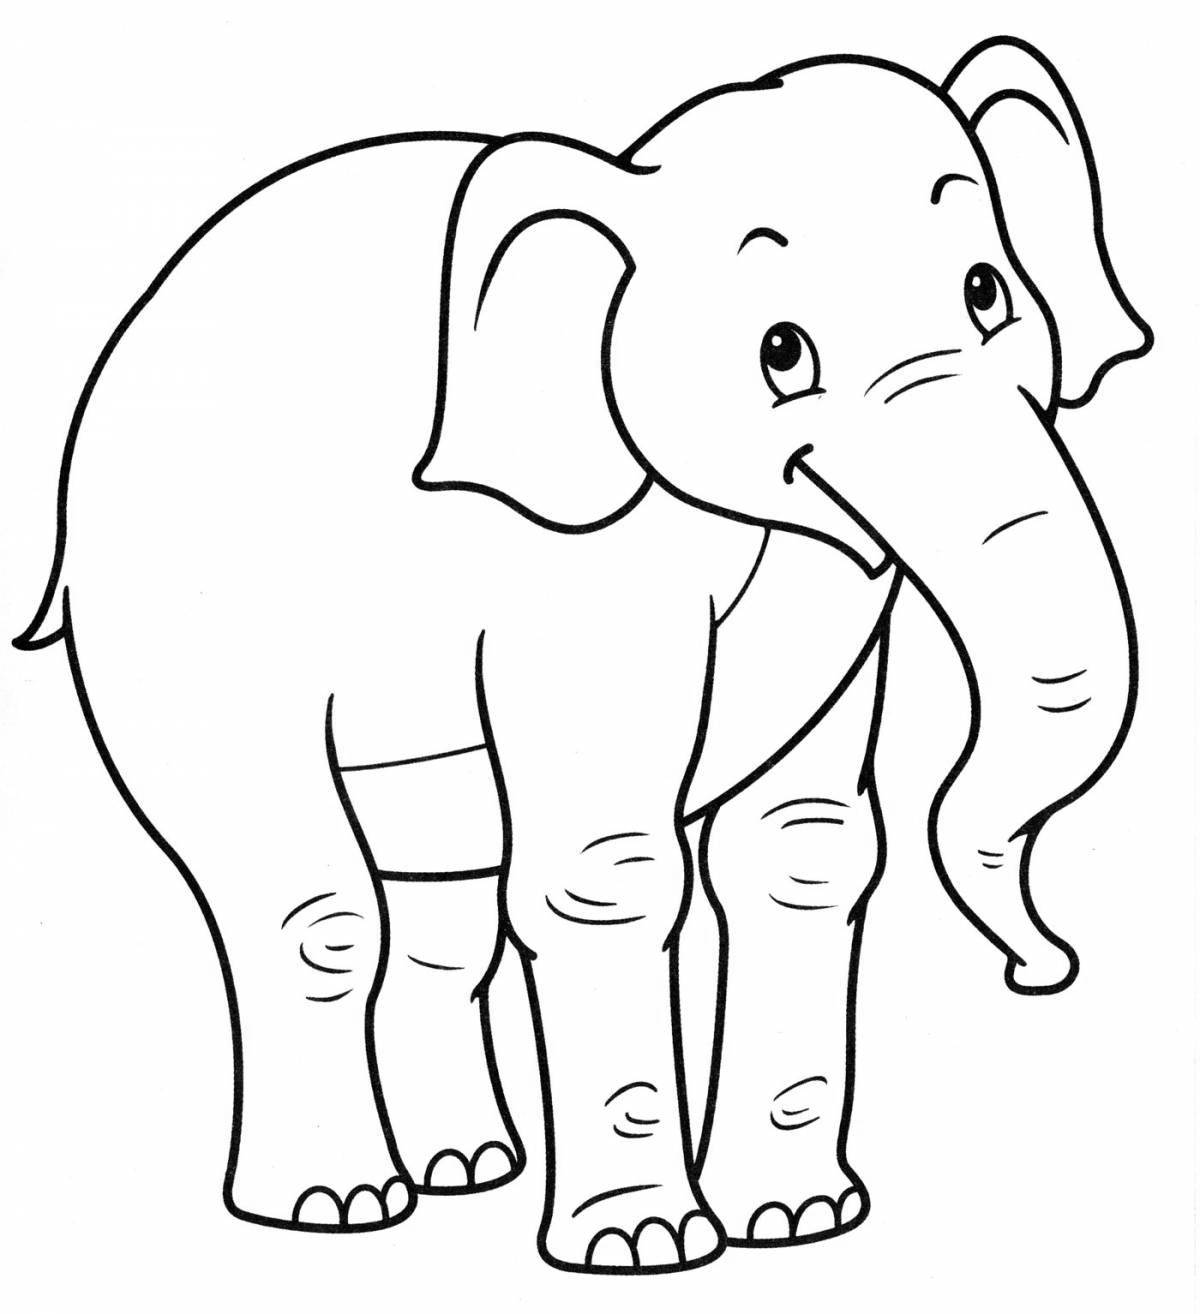 Great elephant coloring book